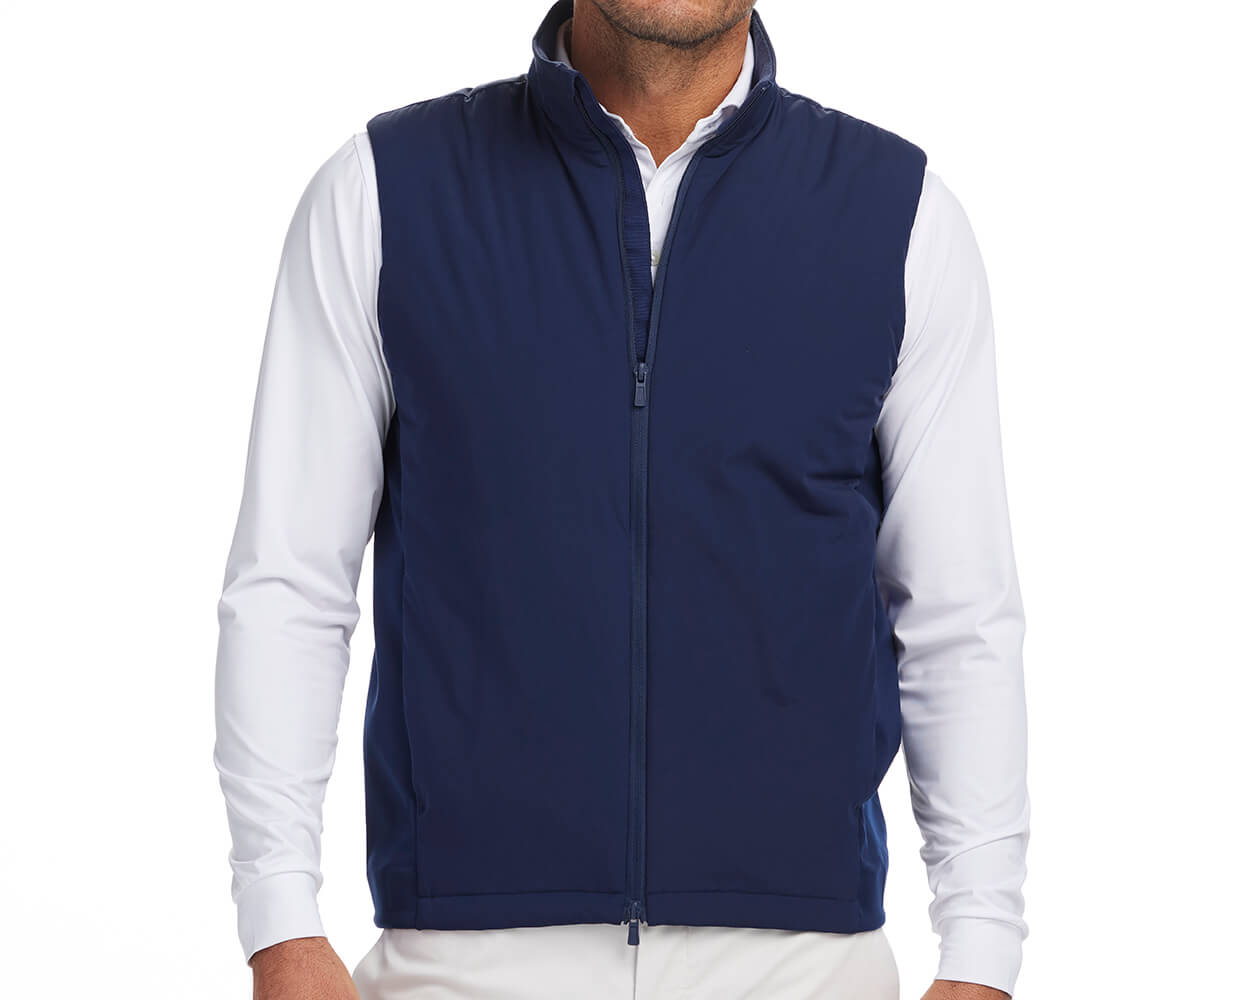 Top 9 Stylish Designs of Blue Vests for Men And Women